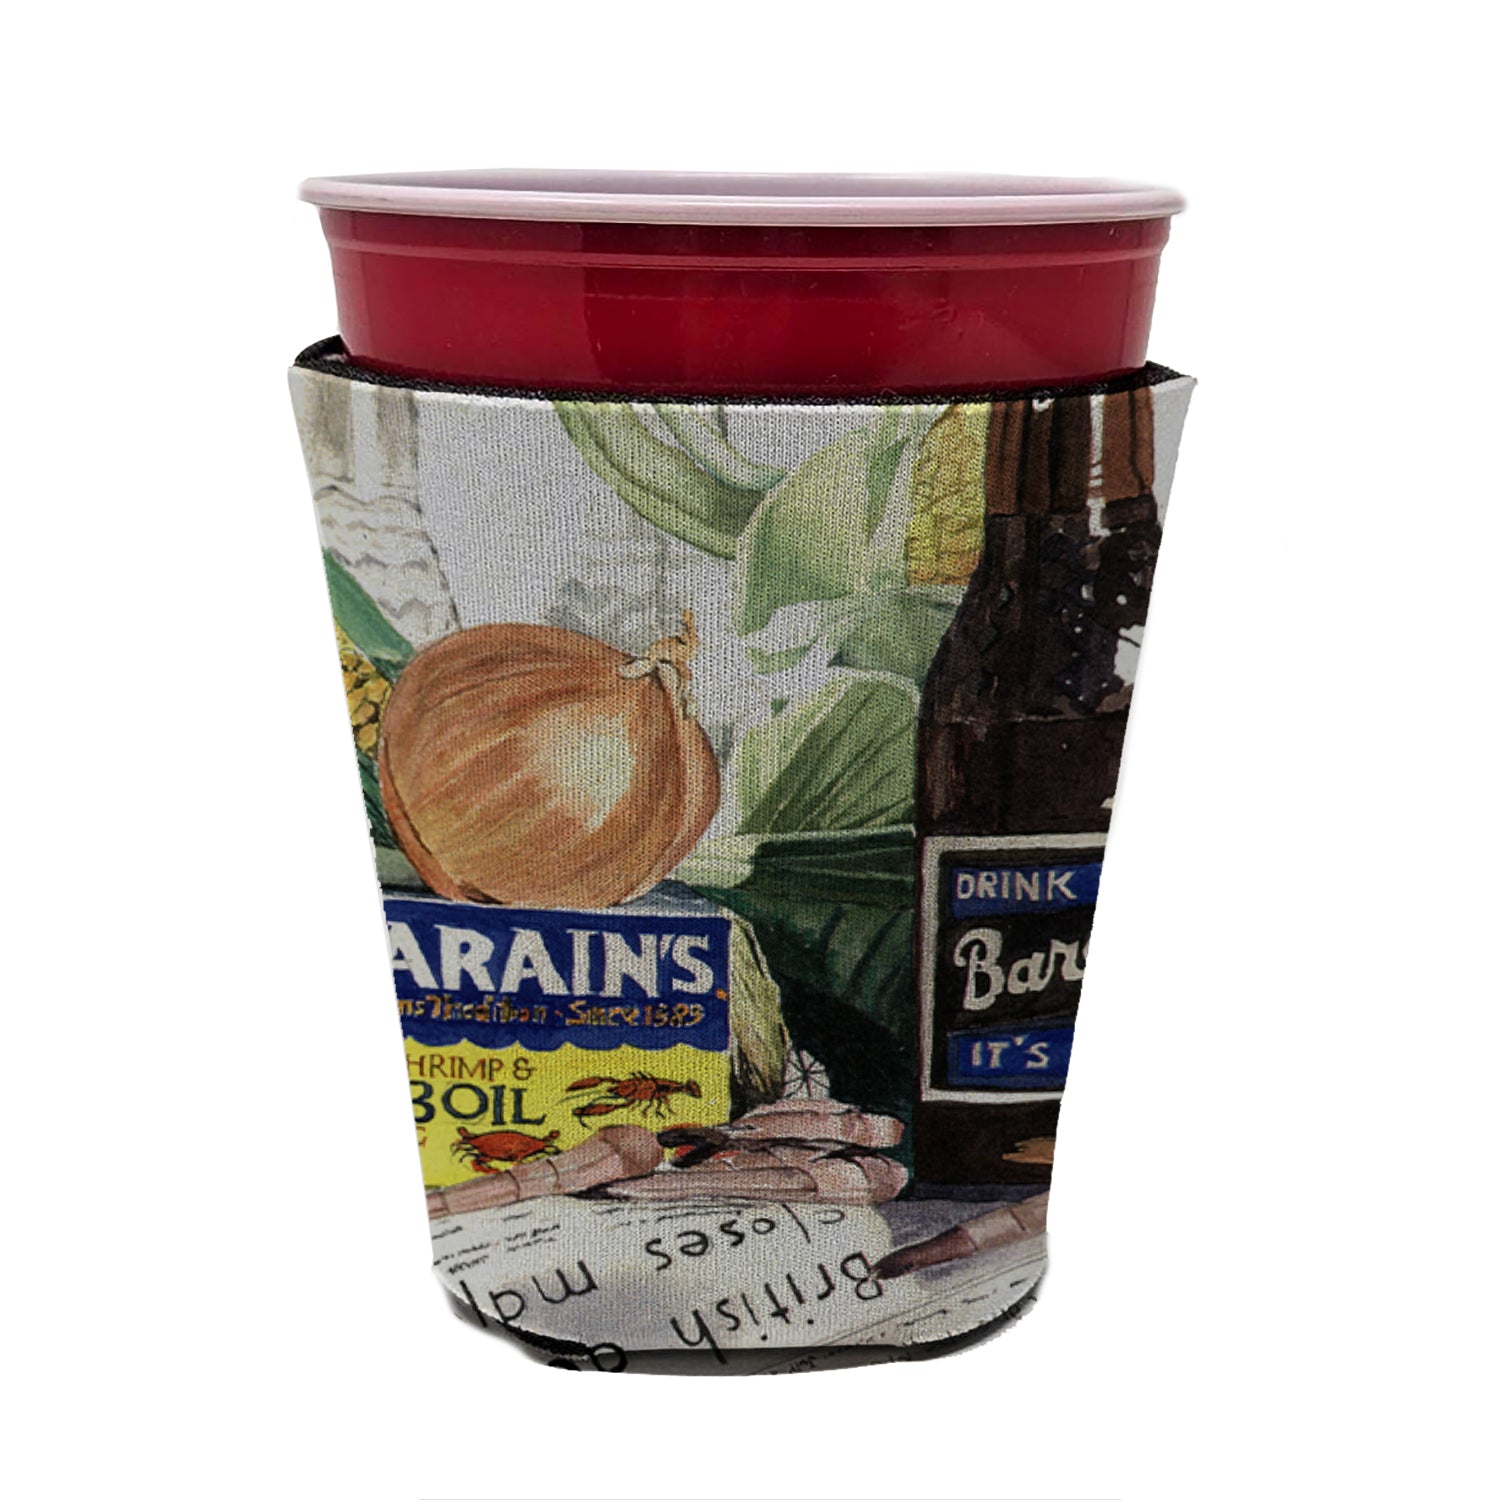 Barq's, Crabs, and spices Red Cup Beverage Insulator Hugger